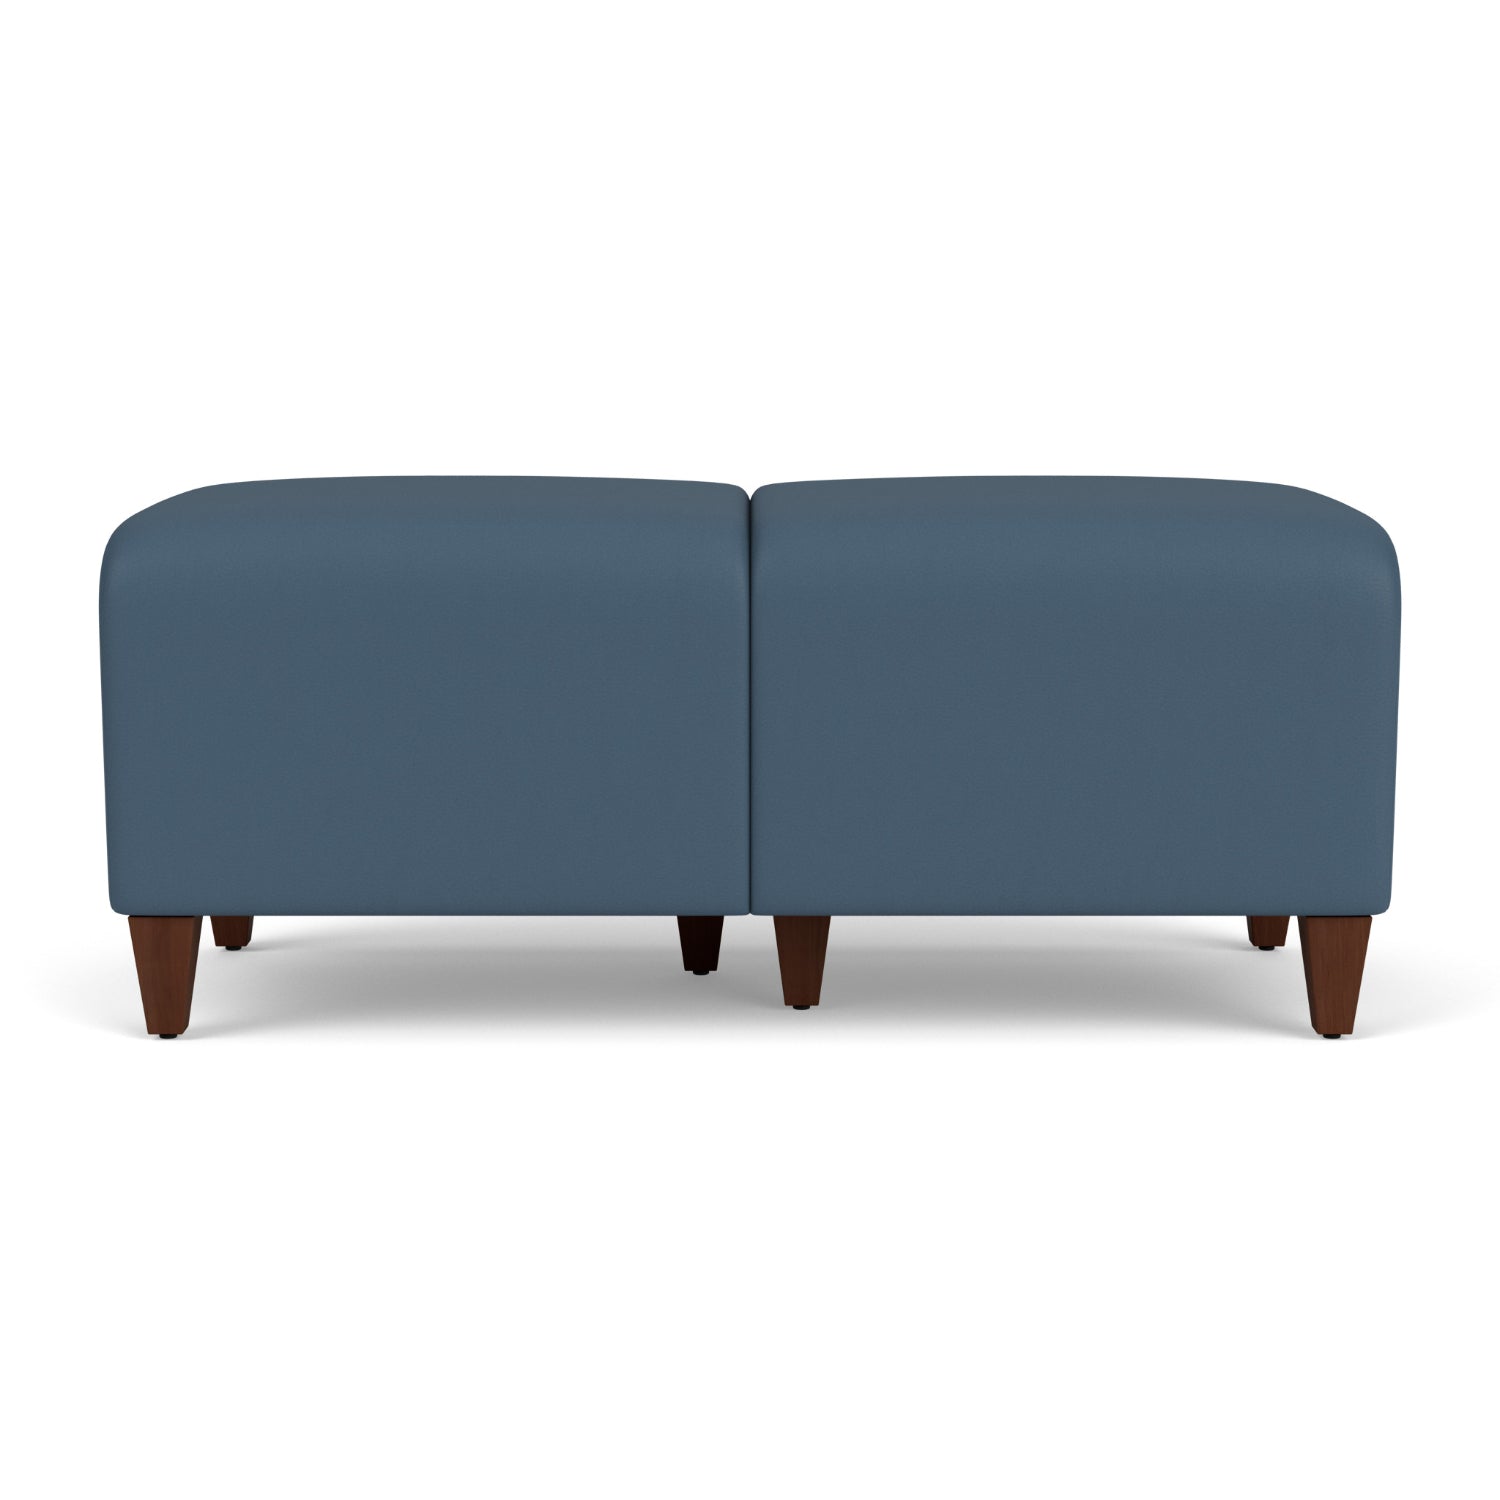 Siena Collection Reception Seating, 2-Seat Bench, Standard Vinyl Upholstery, FREE SHIPPING